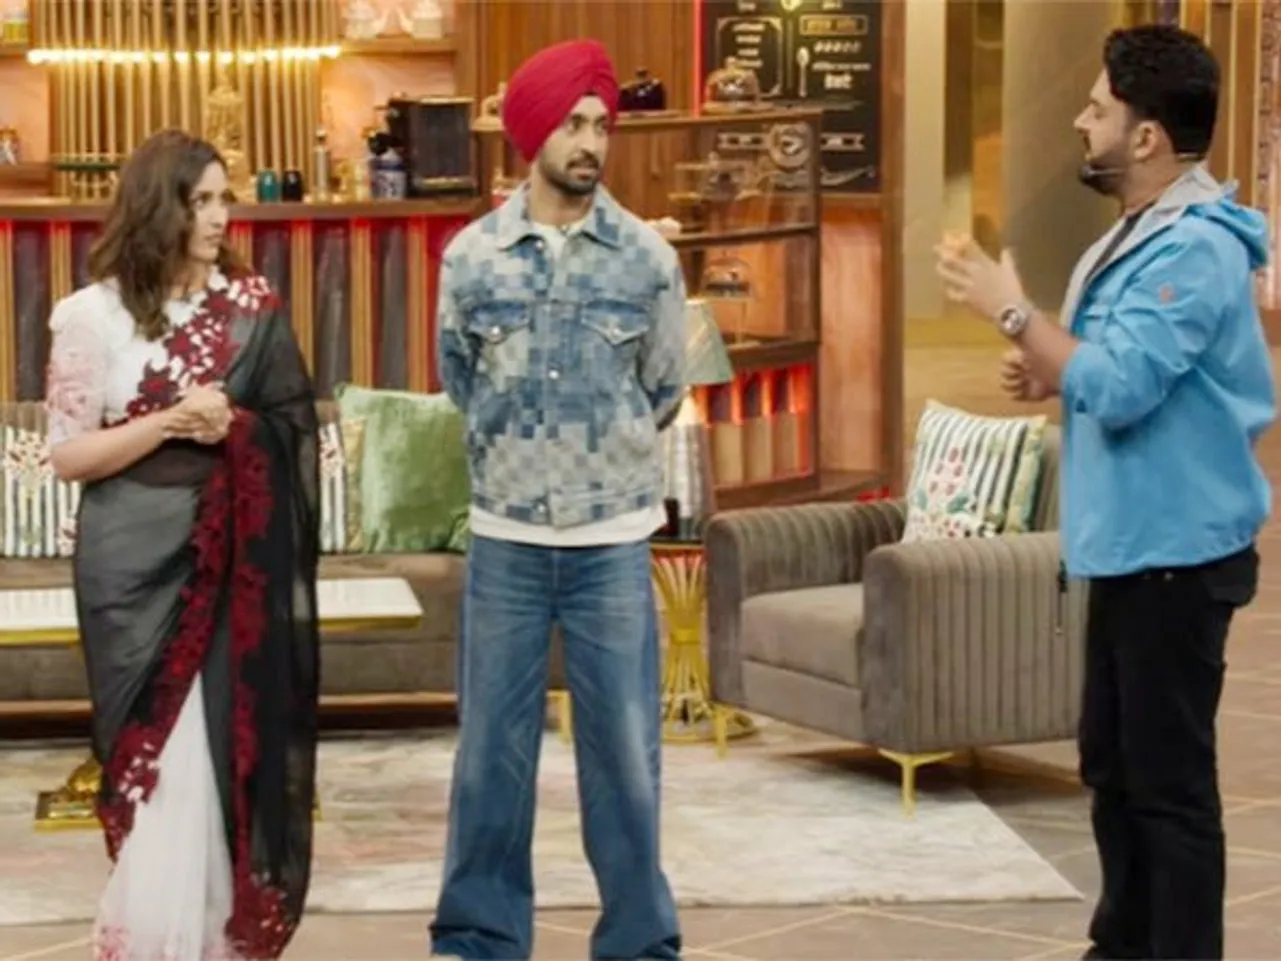 Kapil Sharma's hilarious banter with Diljit Dosanjh, Parineeti Chopra in  'The Great Indian Kapil Show' promo leaves fans excited